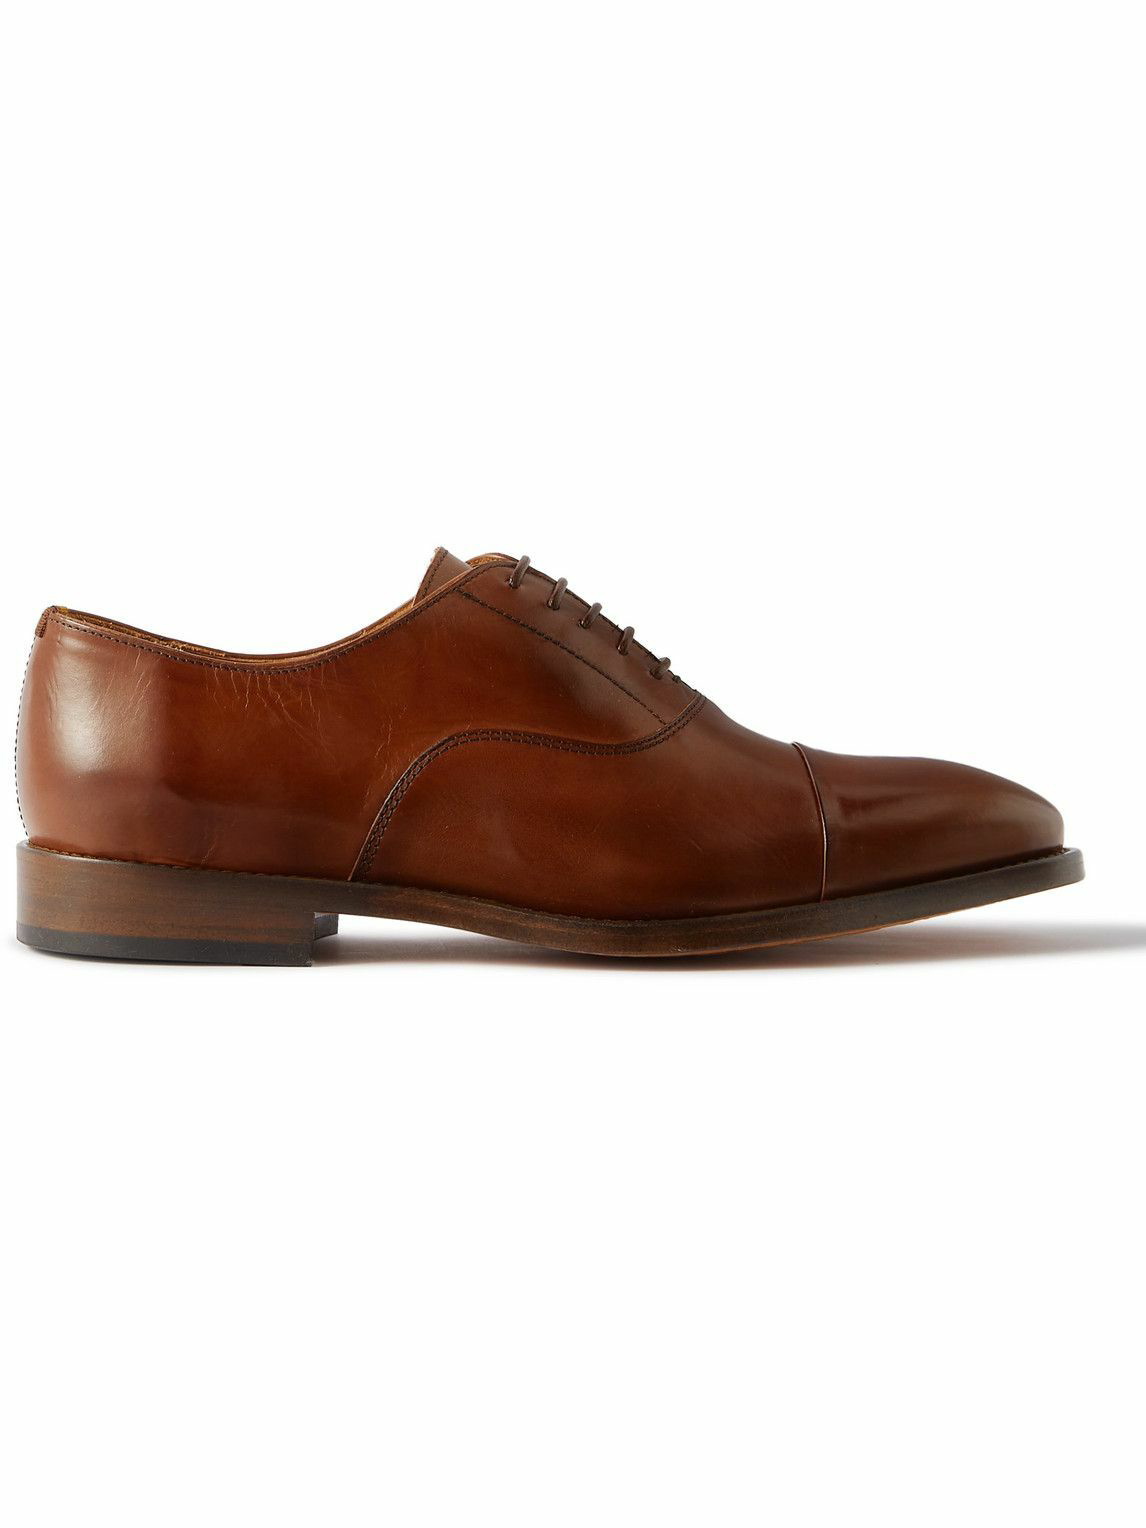 Paul Smith - Leather Oxford Shoes - Brown Paul Smith